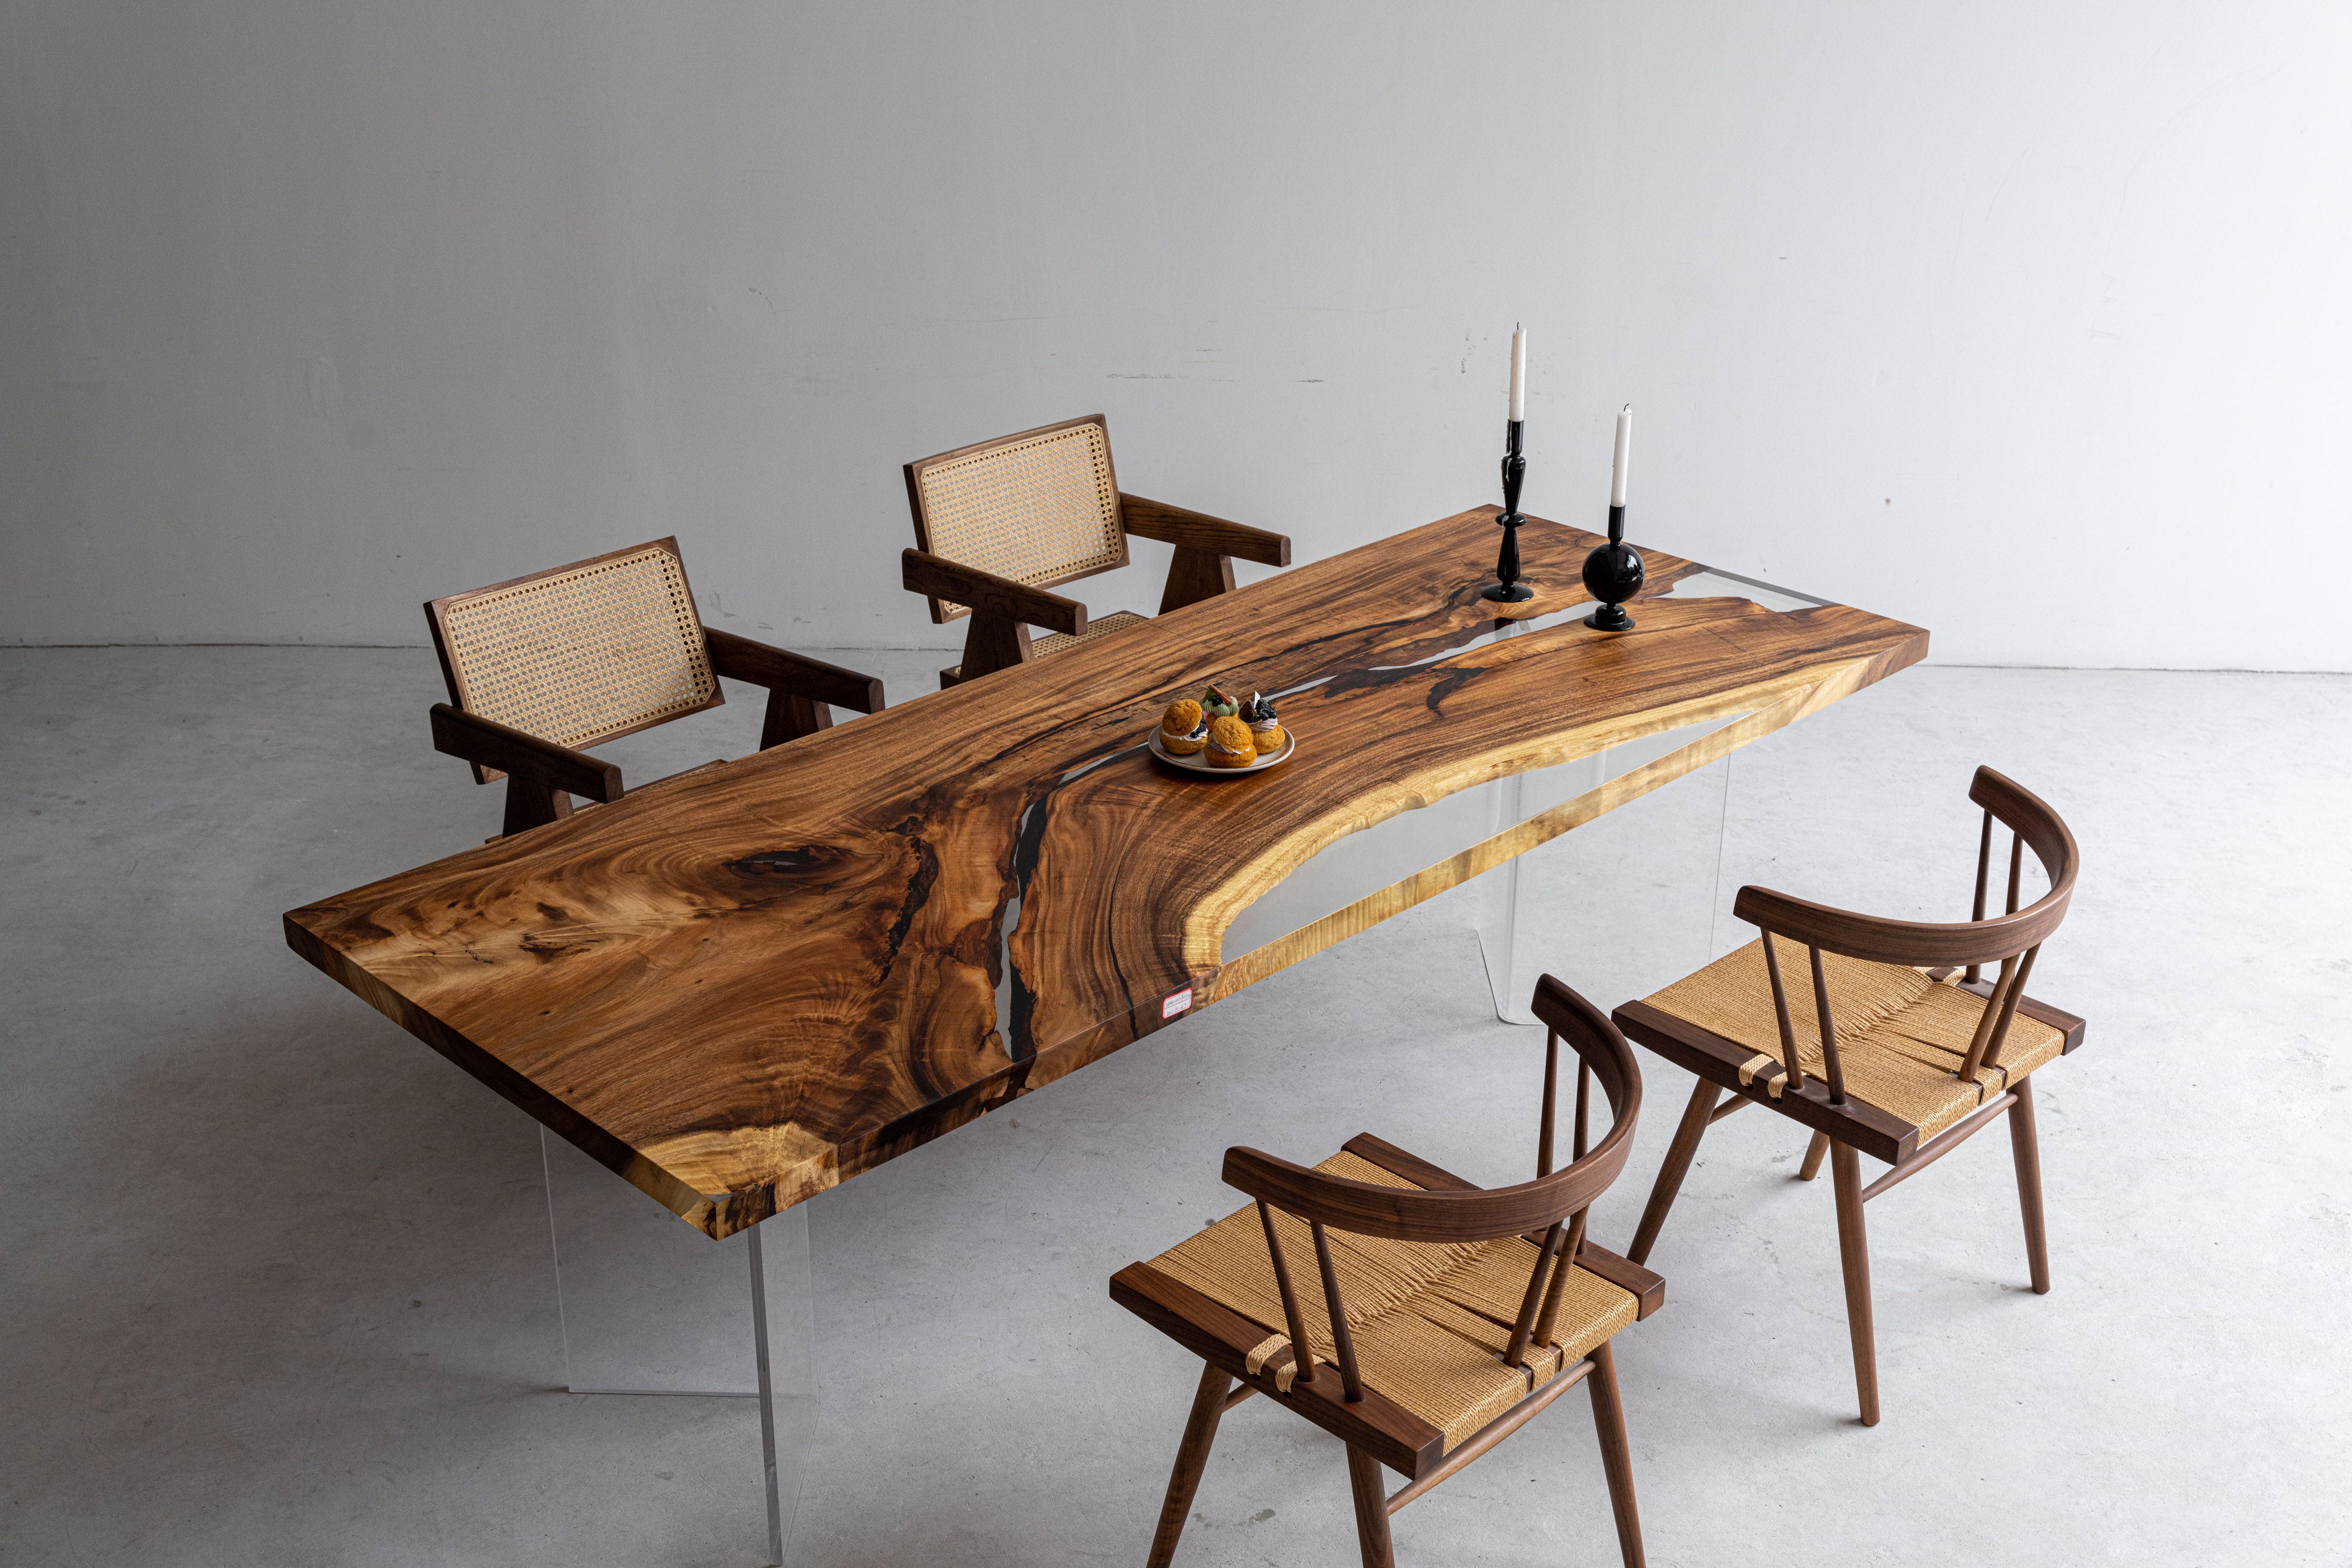 epoxy resin wood table, epoxy resin river table, epoxy resin coffee table